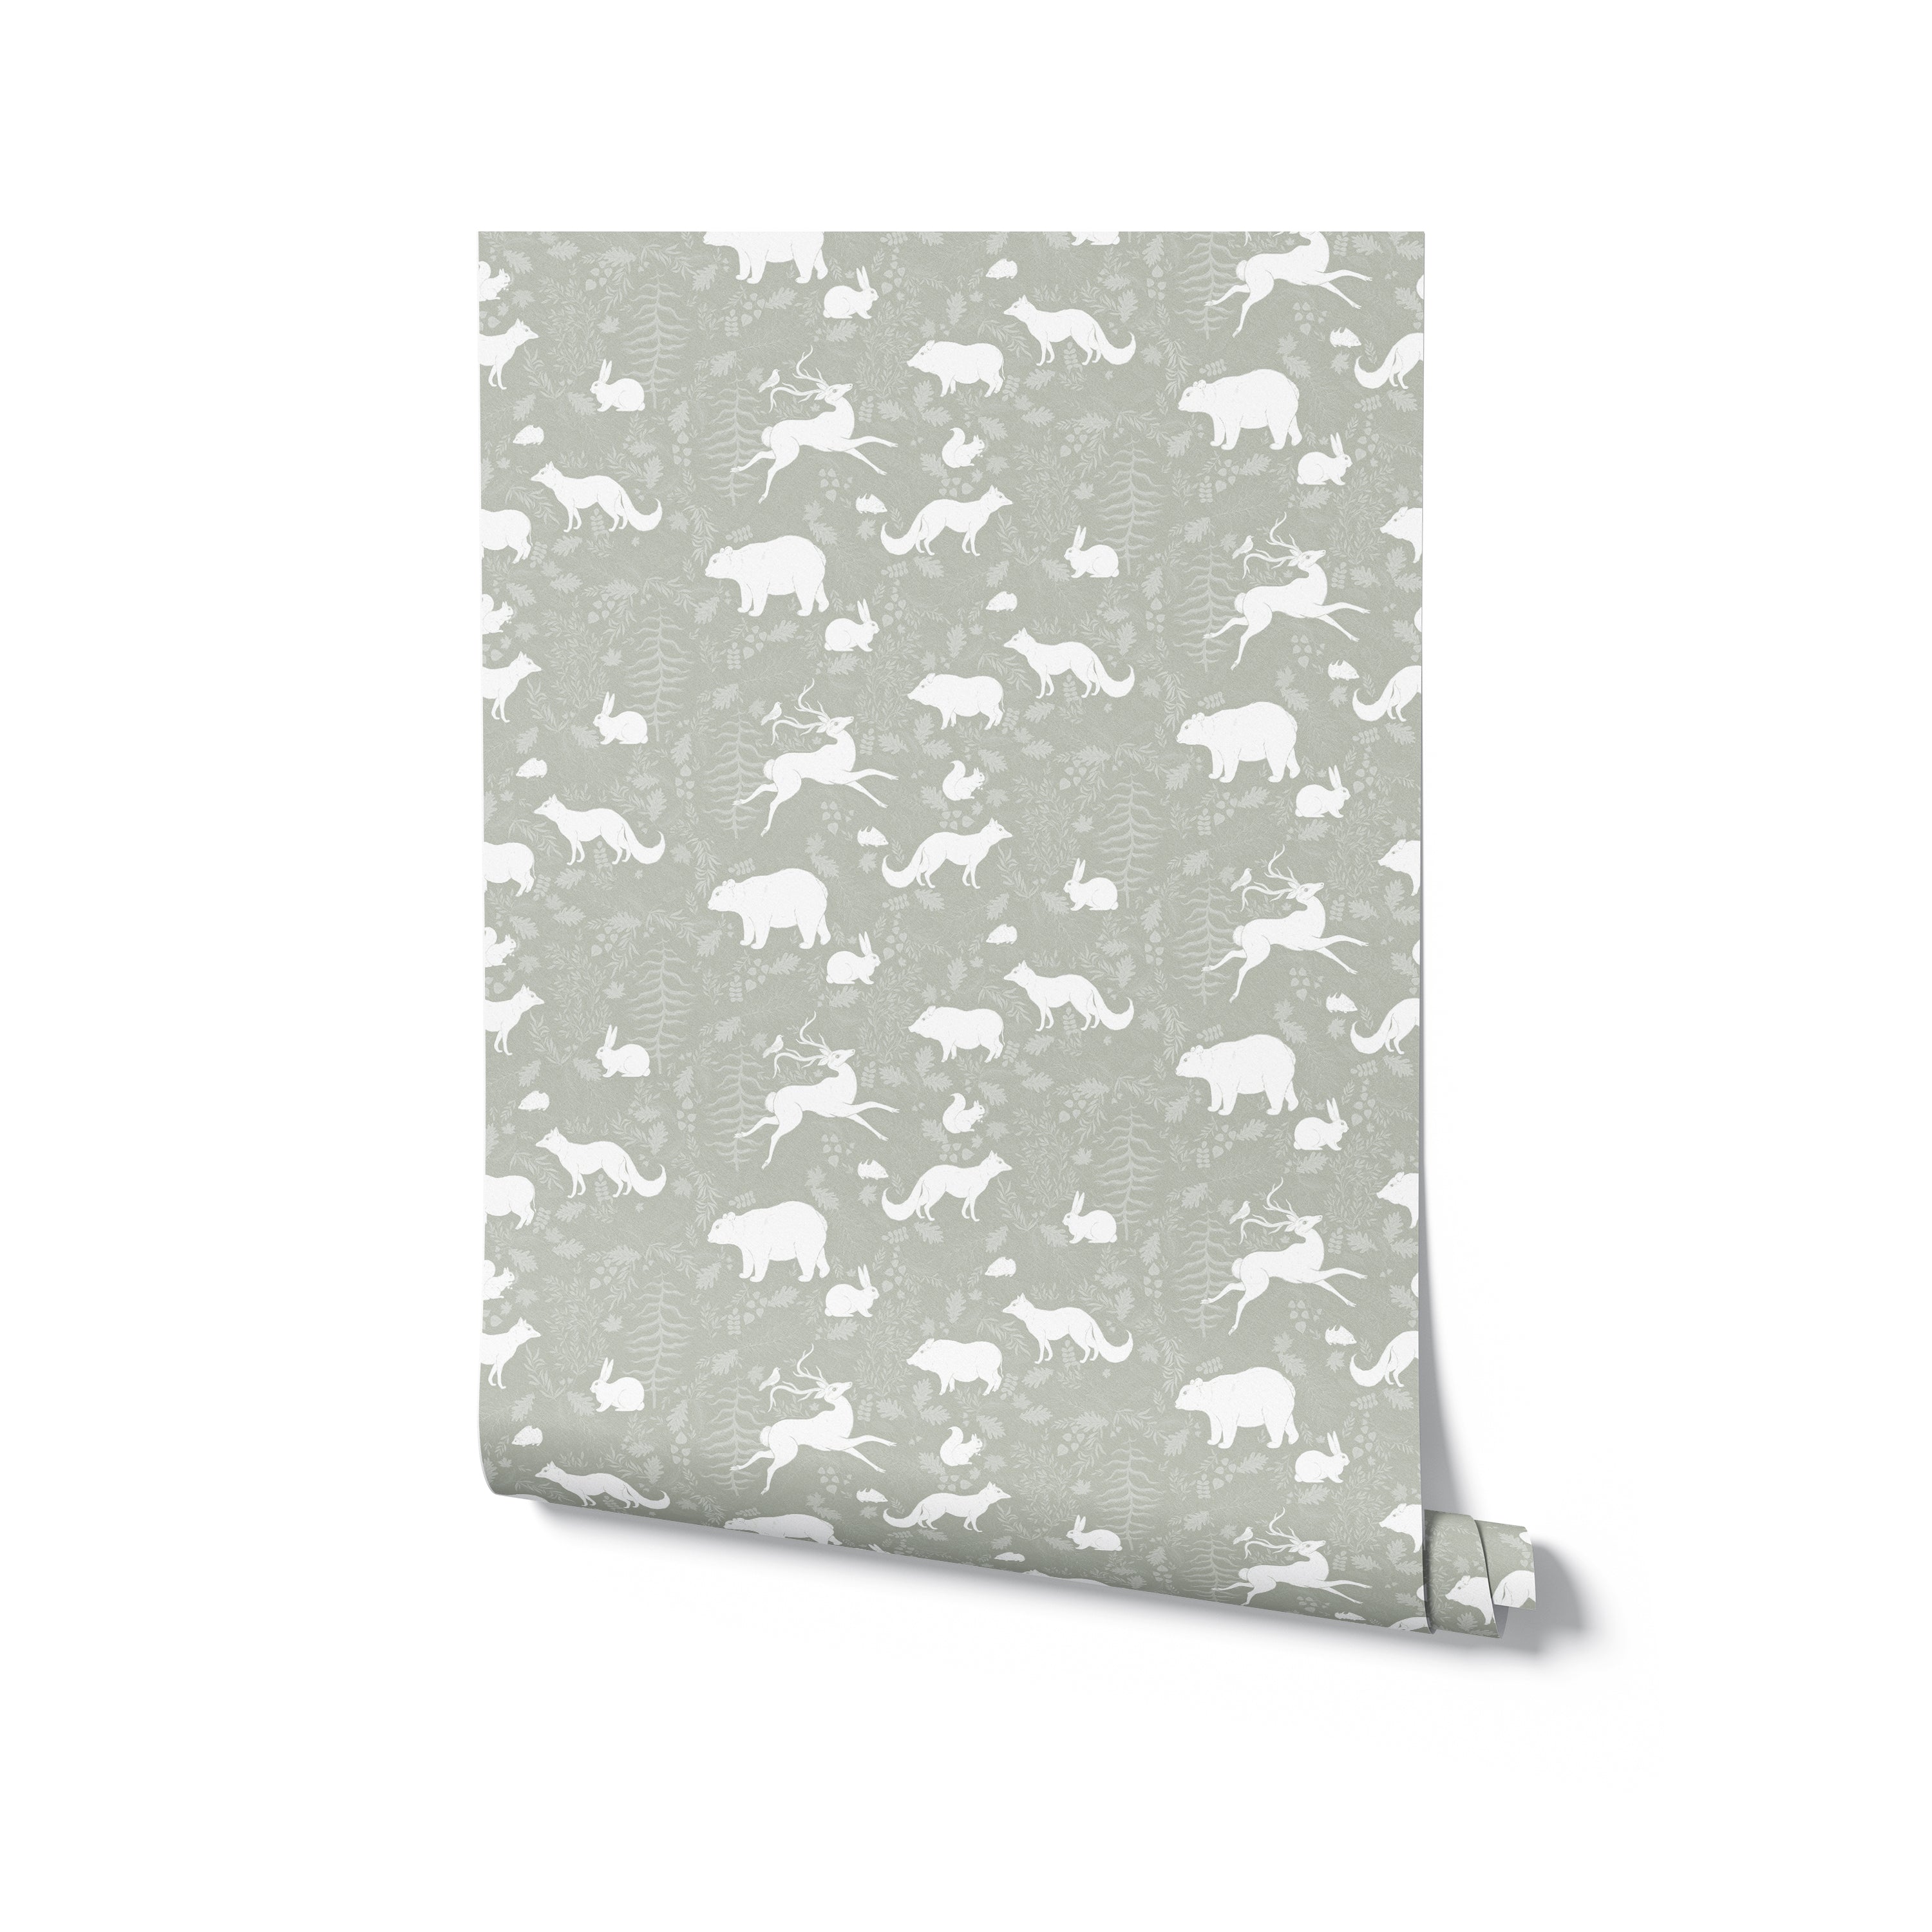 A roll of Forest Silhouettes Wallpaper displaying its white animal silhouettes and foliage pattern on a muted green background. The wallpaper is neatly rolled, highlighting the whimsical and nature-inspired design, perfect for a nursery or children's room.